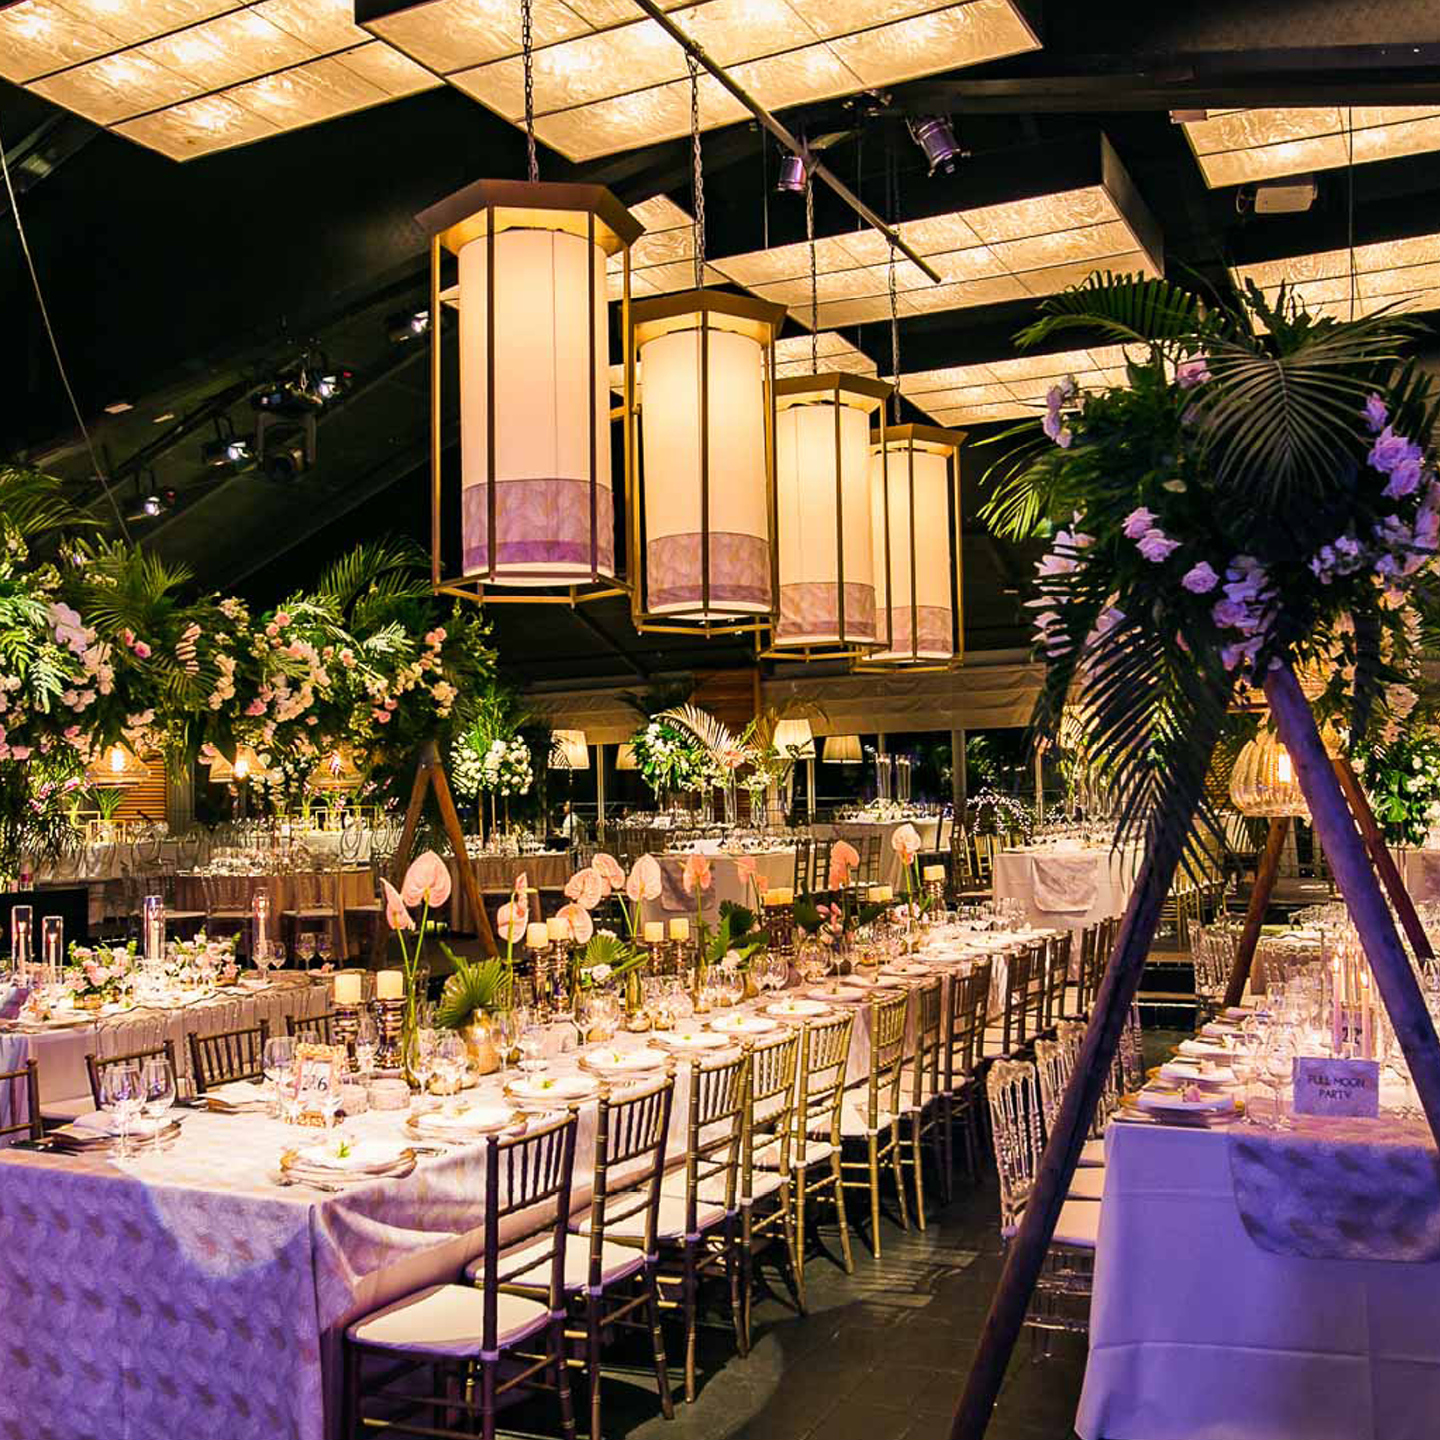 Wedding lighting what you need to know, professional wedding lights